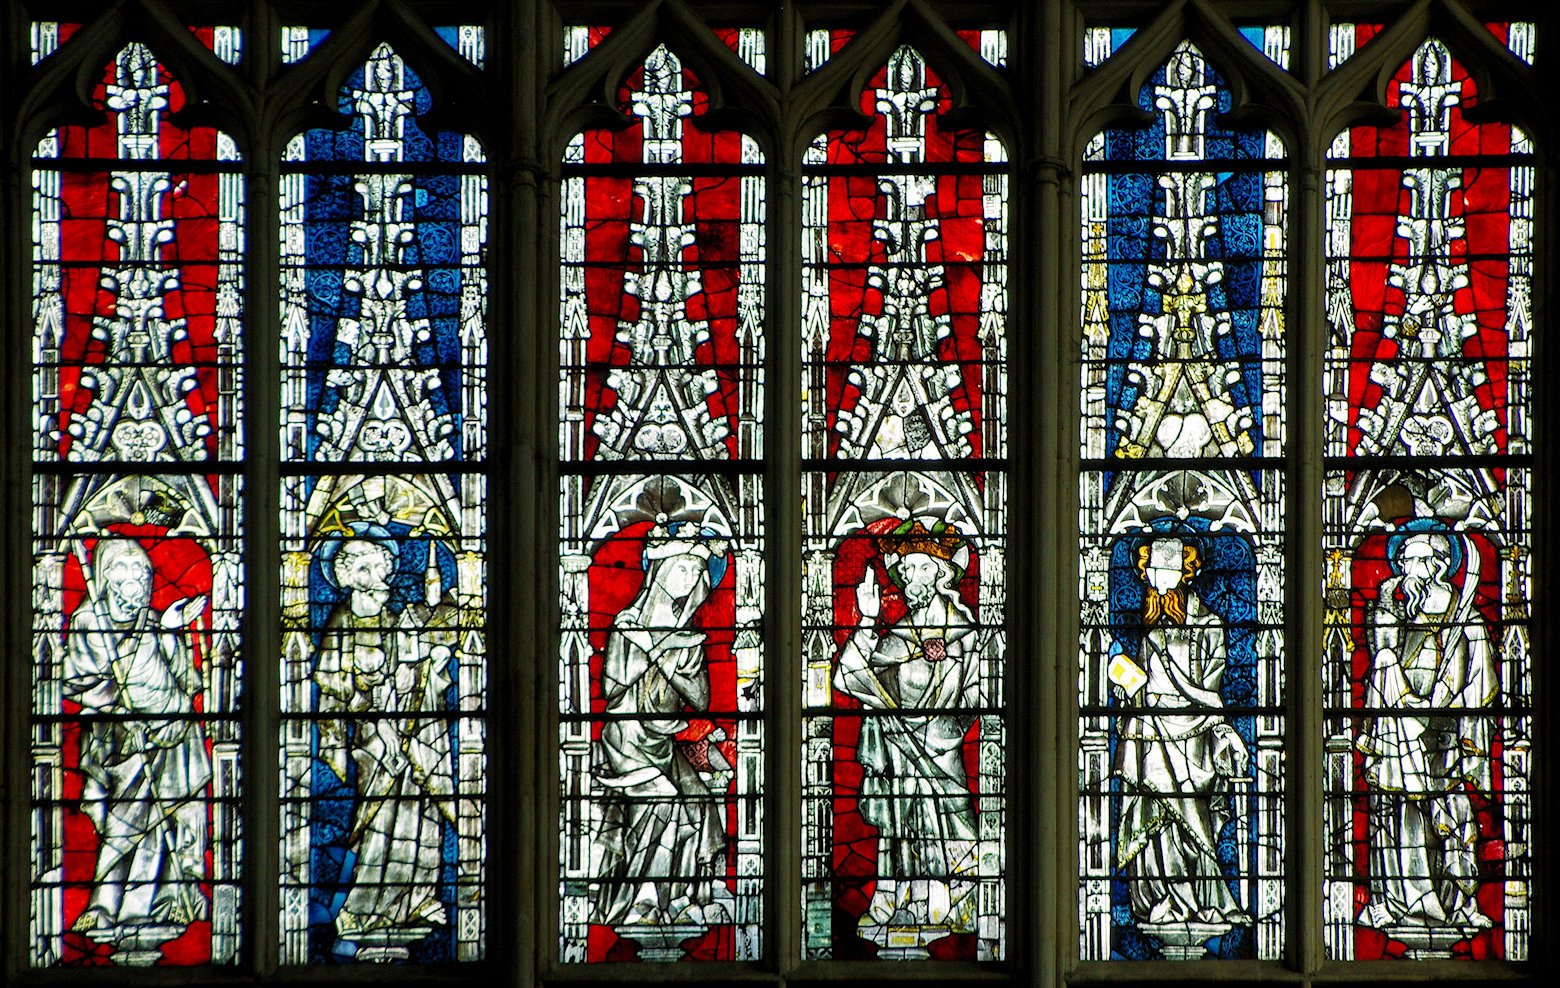 The central panel in the third tier from the top in the window which depicted the characters in the Coronation of the Virgin, with enthroned Mary and Jesus in the middle flanked by four important apostles., St. Thomas and St. Peter on the left and St. Paul and St. John on the right (19/05/2014.)